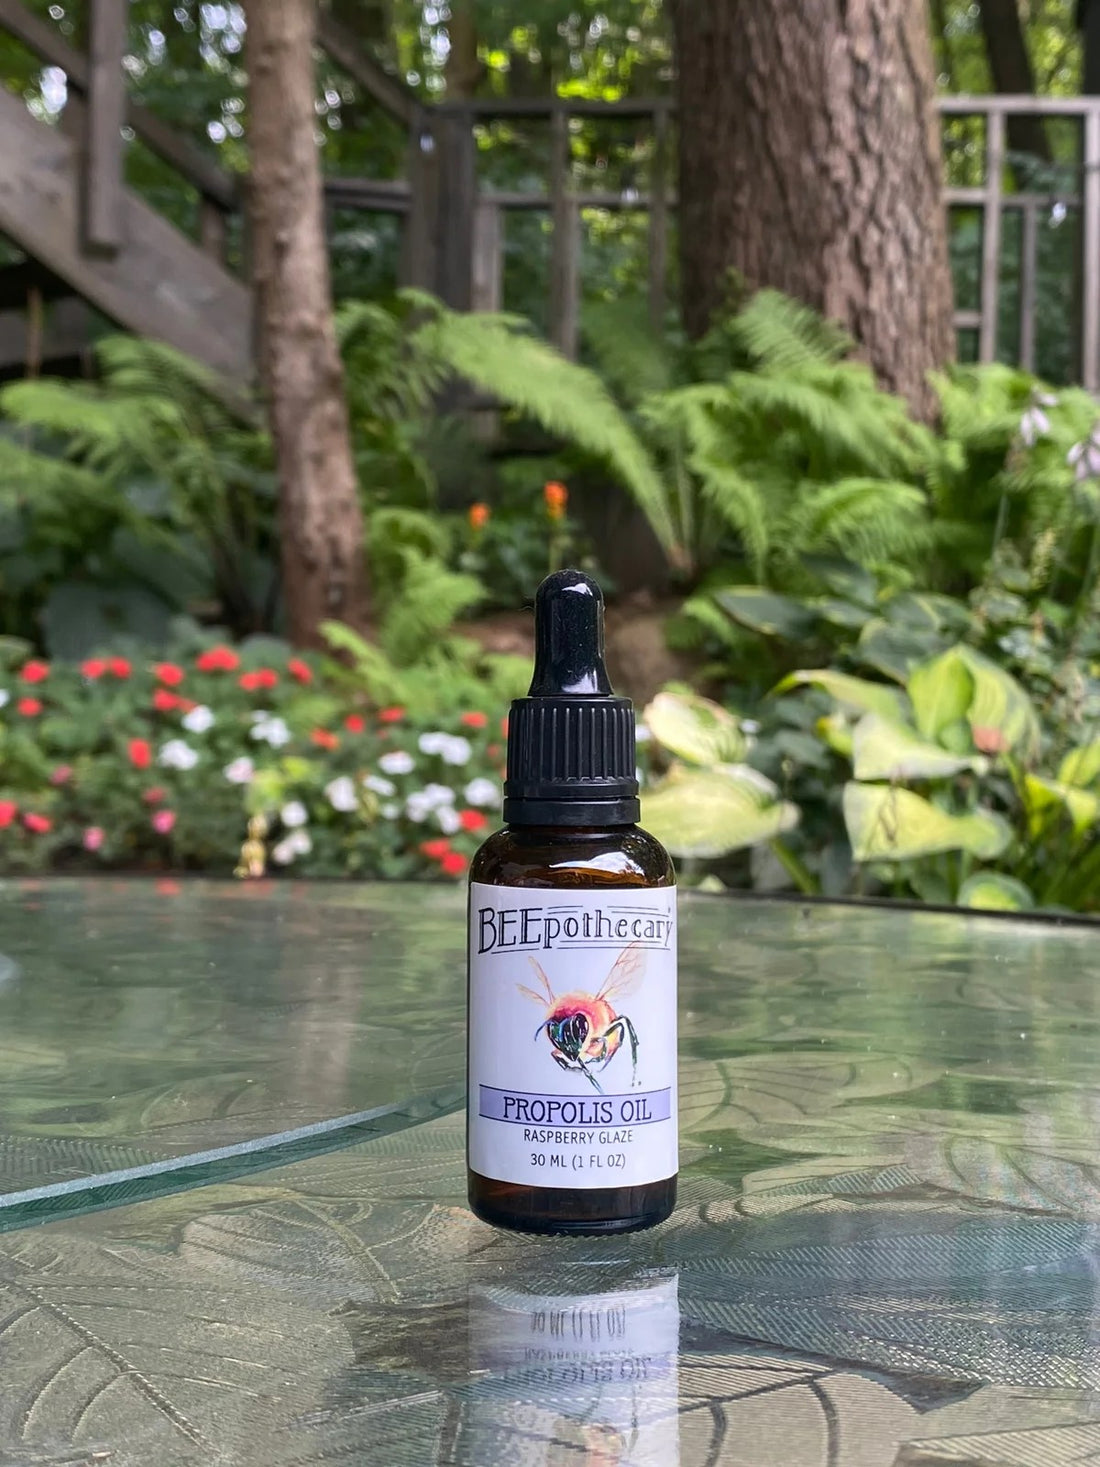 BEEpothecary Propolis Oil Raspberry Glaze in 30 ml brown bottle with white label and dropper